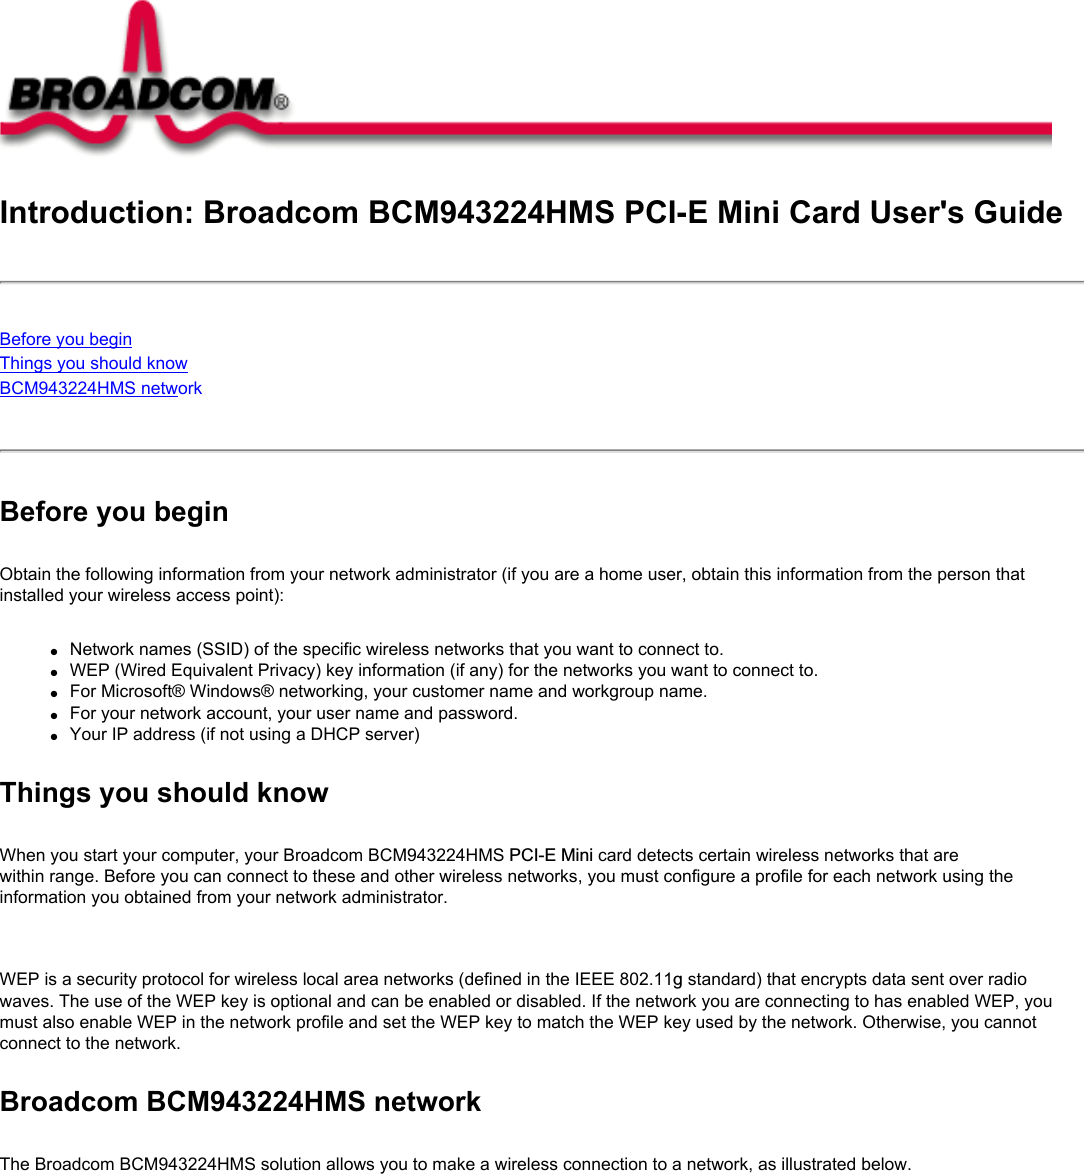 Introduction: Broadcom BCM943224HMS PCI-E Mini Card User&apos;s GuideBefore you beginThings you should knowBCM943224HMS network Before you beginObtain the following information from your network administrator (if you are a home user, obtain this information from the person that installed your wireless access point):●     Network names (SSID) of the specific wireless networks that you want to connect to.●     WEP (Wired Equivalent Privacy) key information (if any) for the networks you want to connect to.●     For Microsoft® Windows® networking, your customer name and workgroup name.●     For your network account, your user name and password.●     Your IP address (if not using a DHCP server)Things you should knowWhen you start your computer, your Broadcom BCM943224HMS PCI-E Mini card detects certain wireless networks that are within range. Before you can connect to these and other wireless networks, you must configure a profile for each network using the information you obtained from your network administrator.   WEP is a security protocol for wireless local area networks (defined in the IEEE 802.11g standard) that encrypts data sent over radio waves. The use of the WEP key is optional and can be enabled or disabled. If the network you are connecting to has enabled WEP, you must also enable WEP in the network profile and set the WEP key to match the WEP key used by the network. Otherwise, you cannot connect to the network.Broadcom BCM943224HMS networkThe Broadcom BCM943224HMS solution allows you to make a wireless connection to a network, as illustrated below.